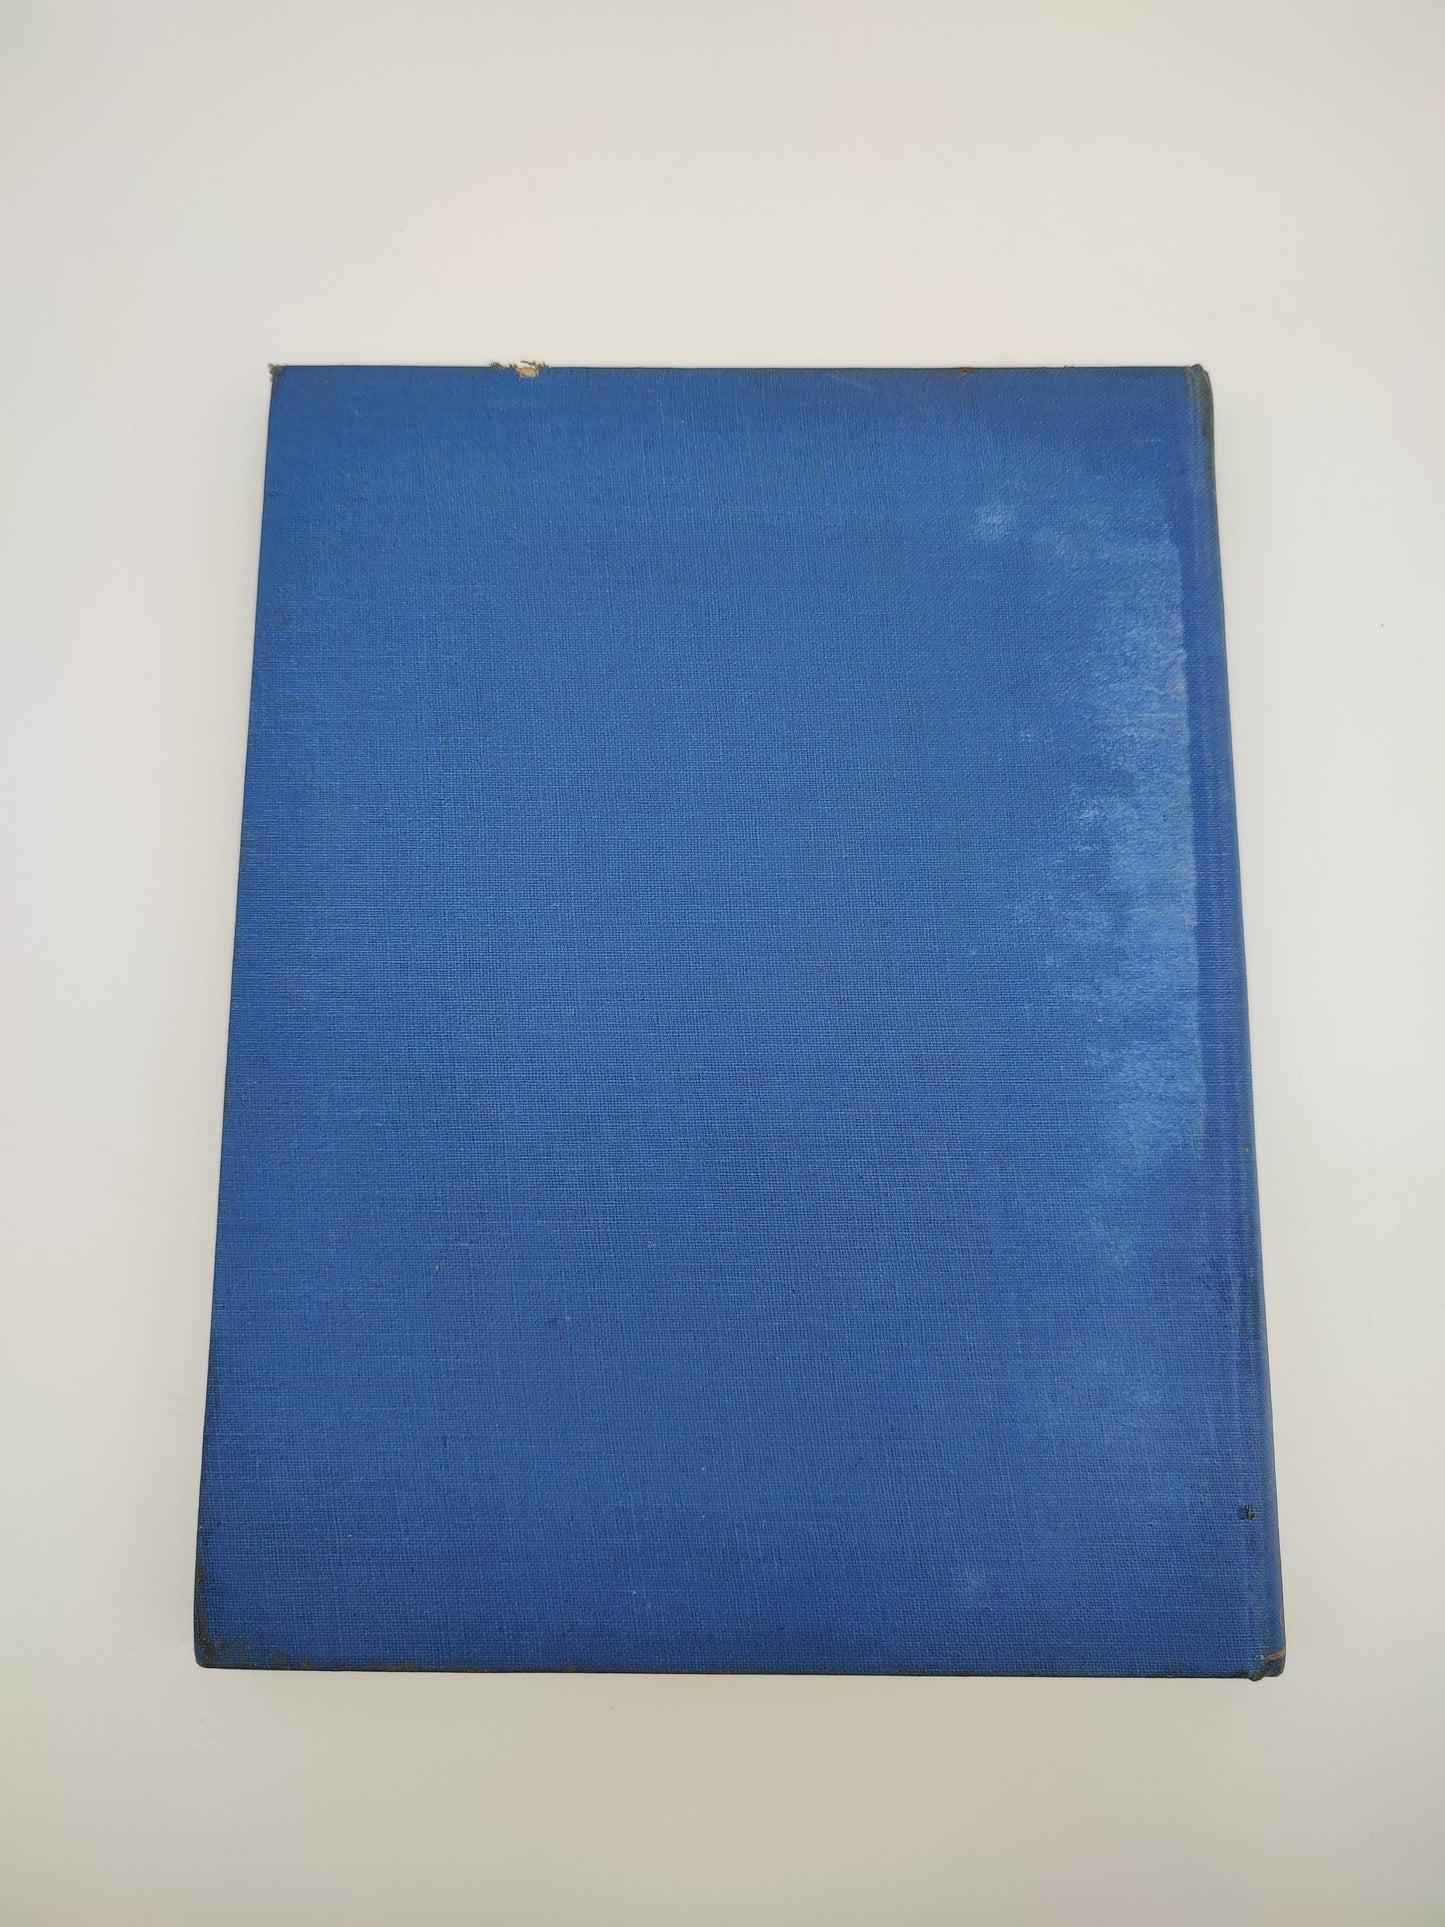 69804 Libro Out of the heart of Italy, Dal cor gentil d'Italia, Grace Warrack, Oxford, 1925